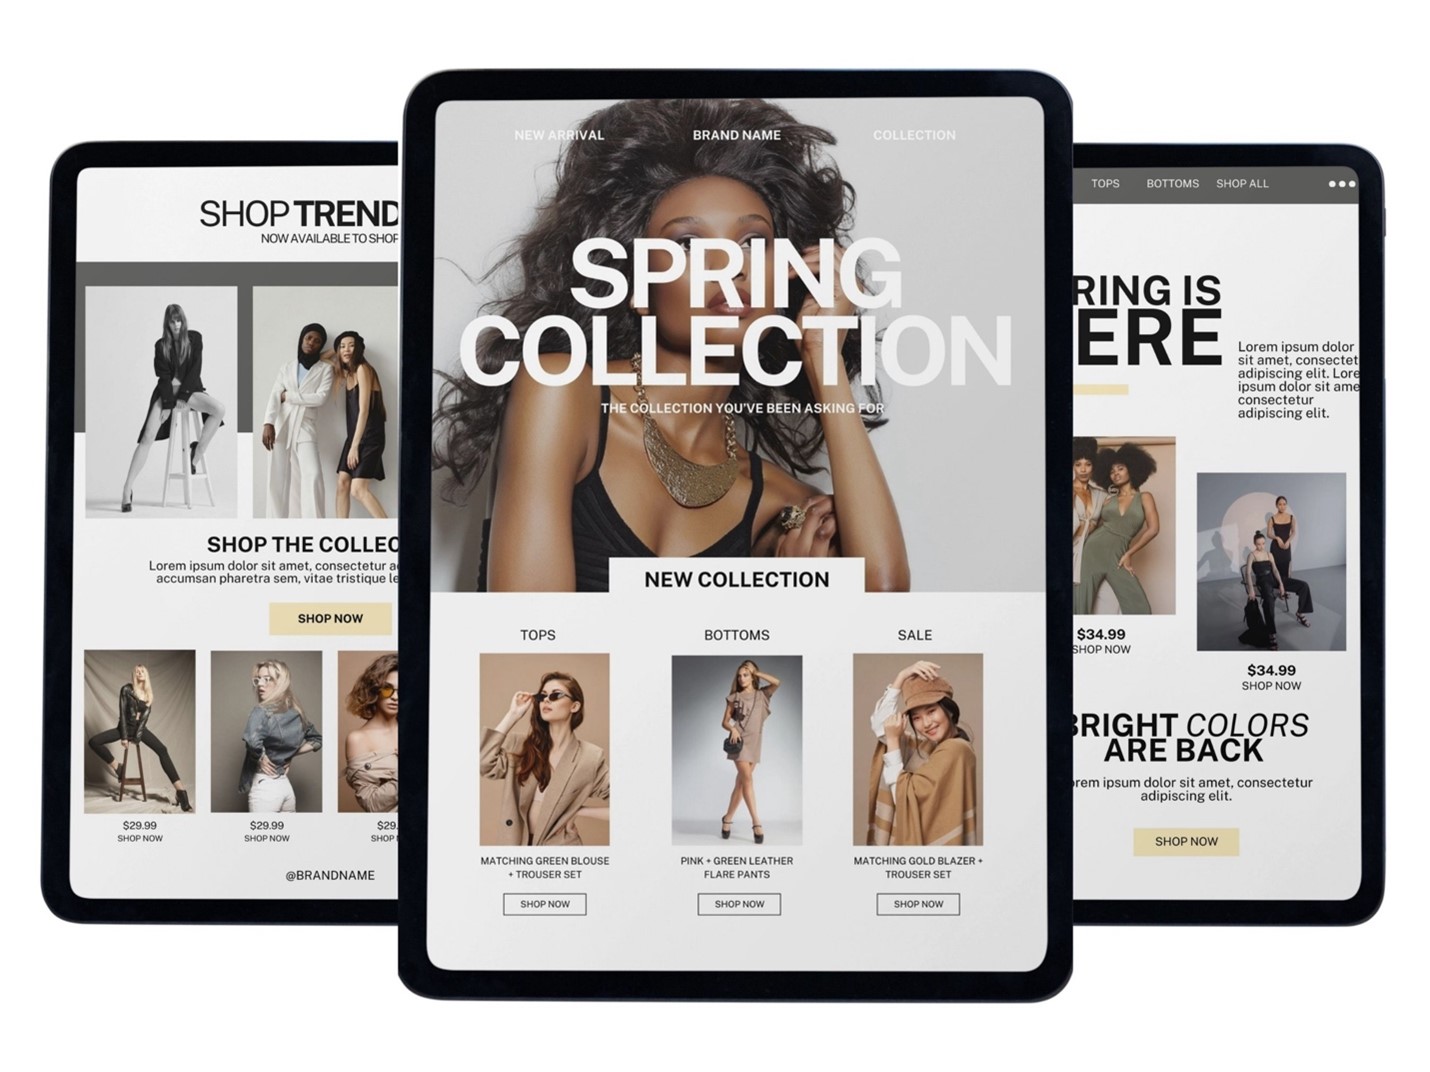 Fashion Email Marketing: Examples, Best Practices and Tips